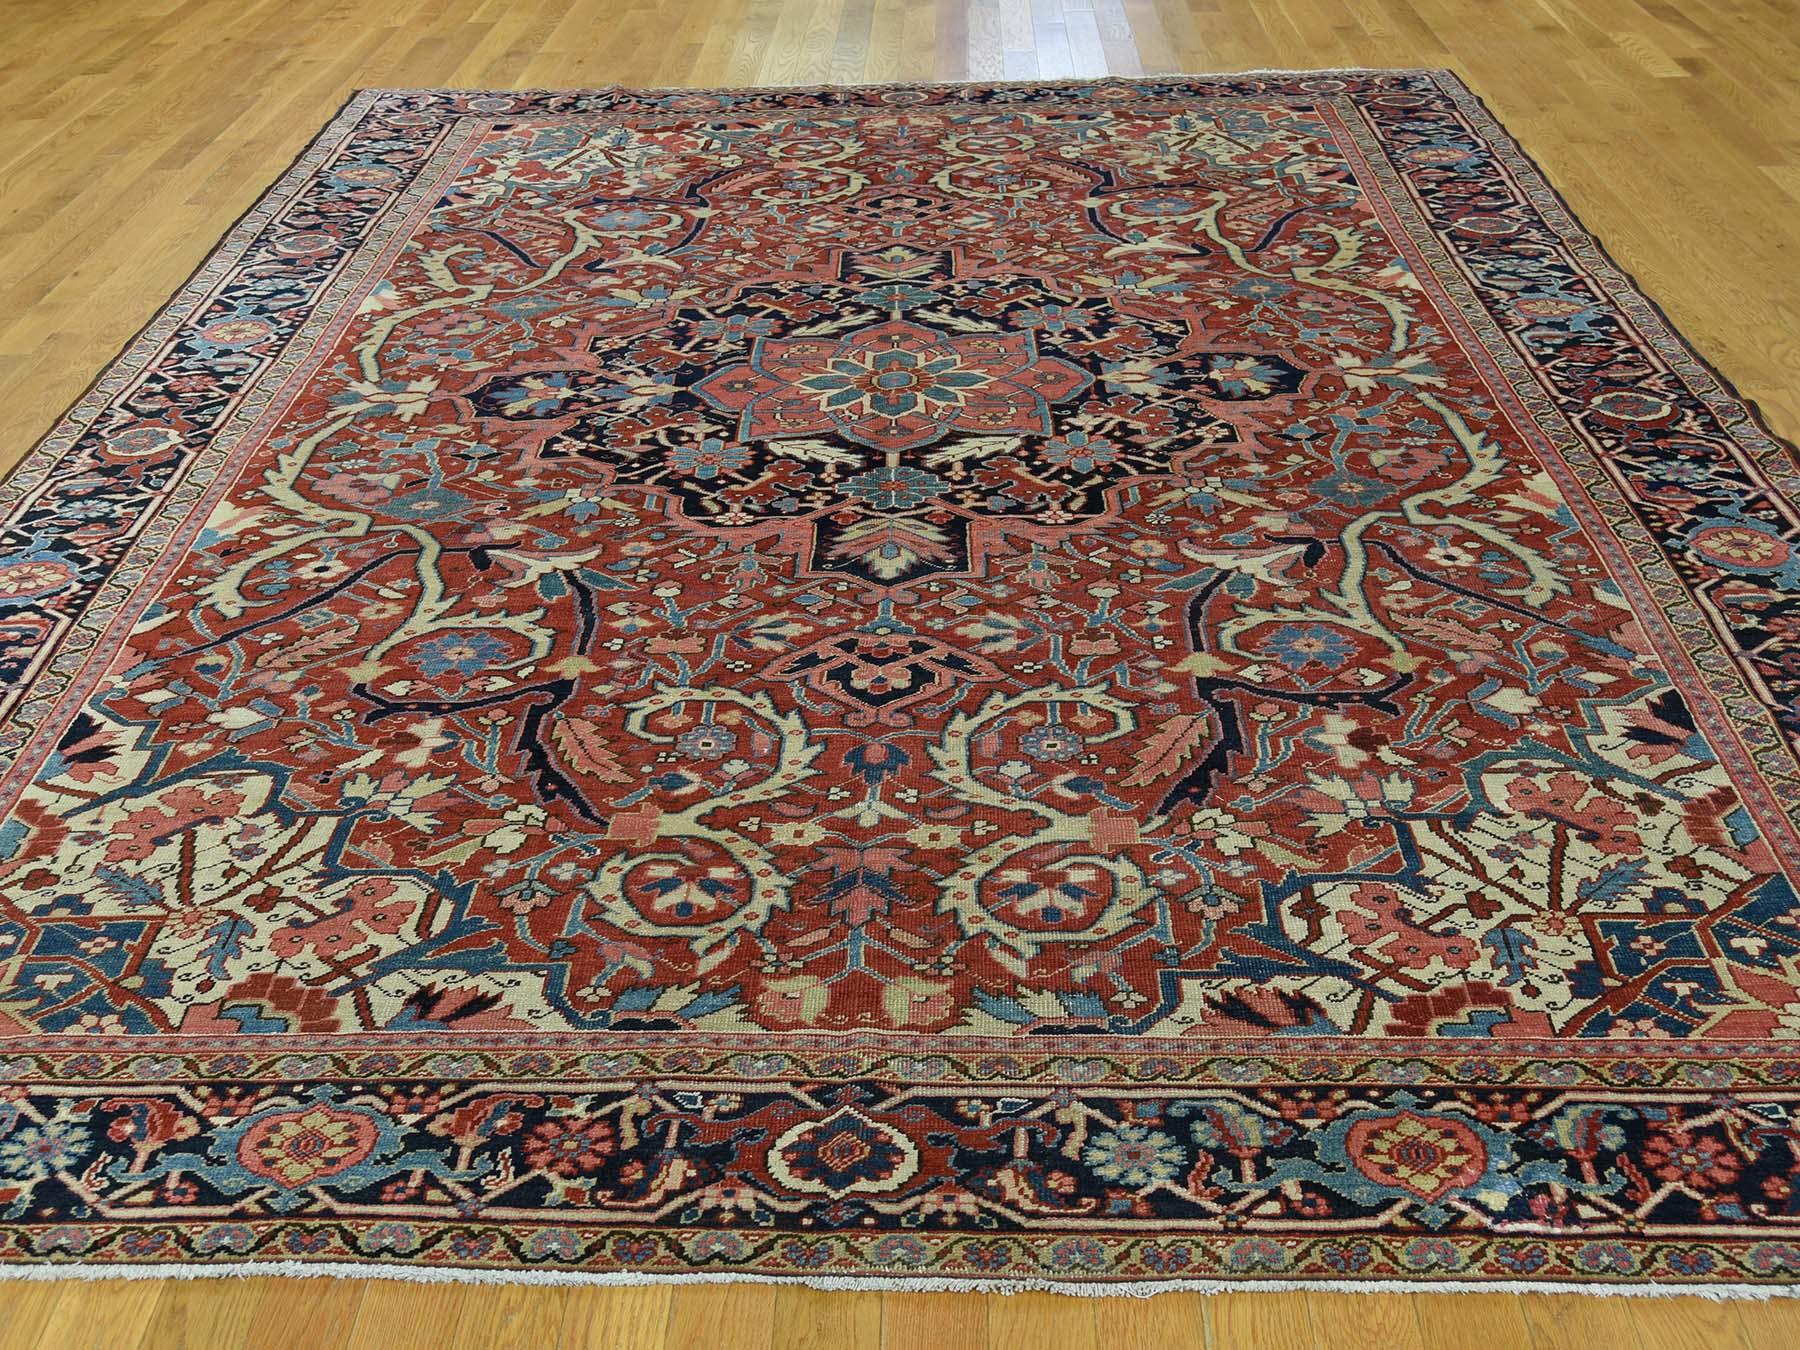 This is a genuine hand knotted oriental rug. It is not hand tufted or machine made rug. Our entire inventory is made of either hand knotted or handwoven rugs.

Remake your home with this amazing antique carpet. This handcrafted Persian Heriz